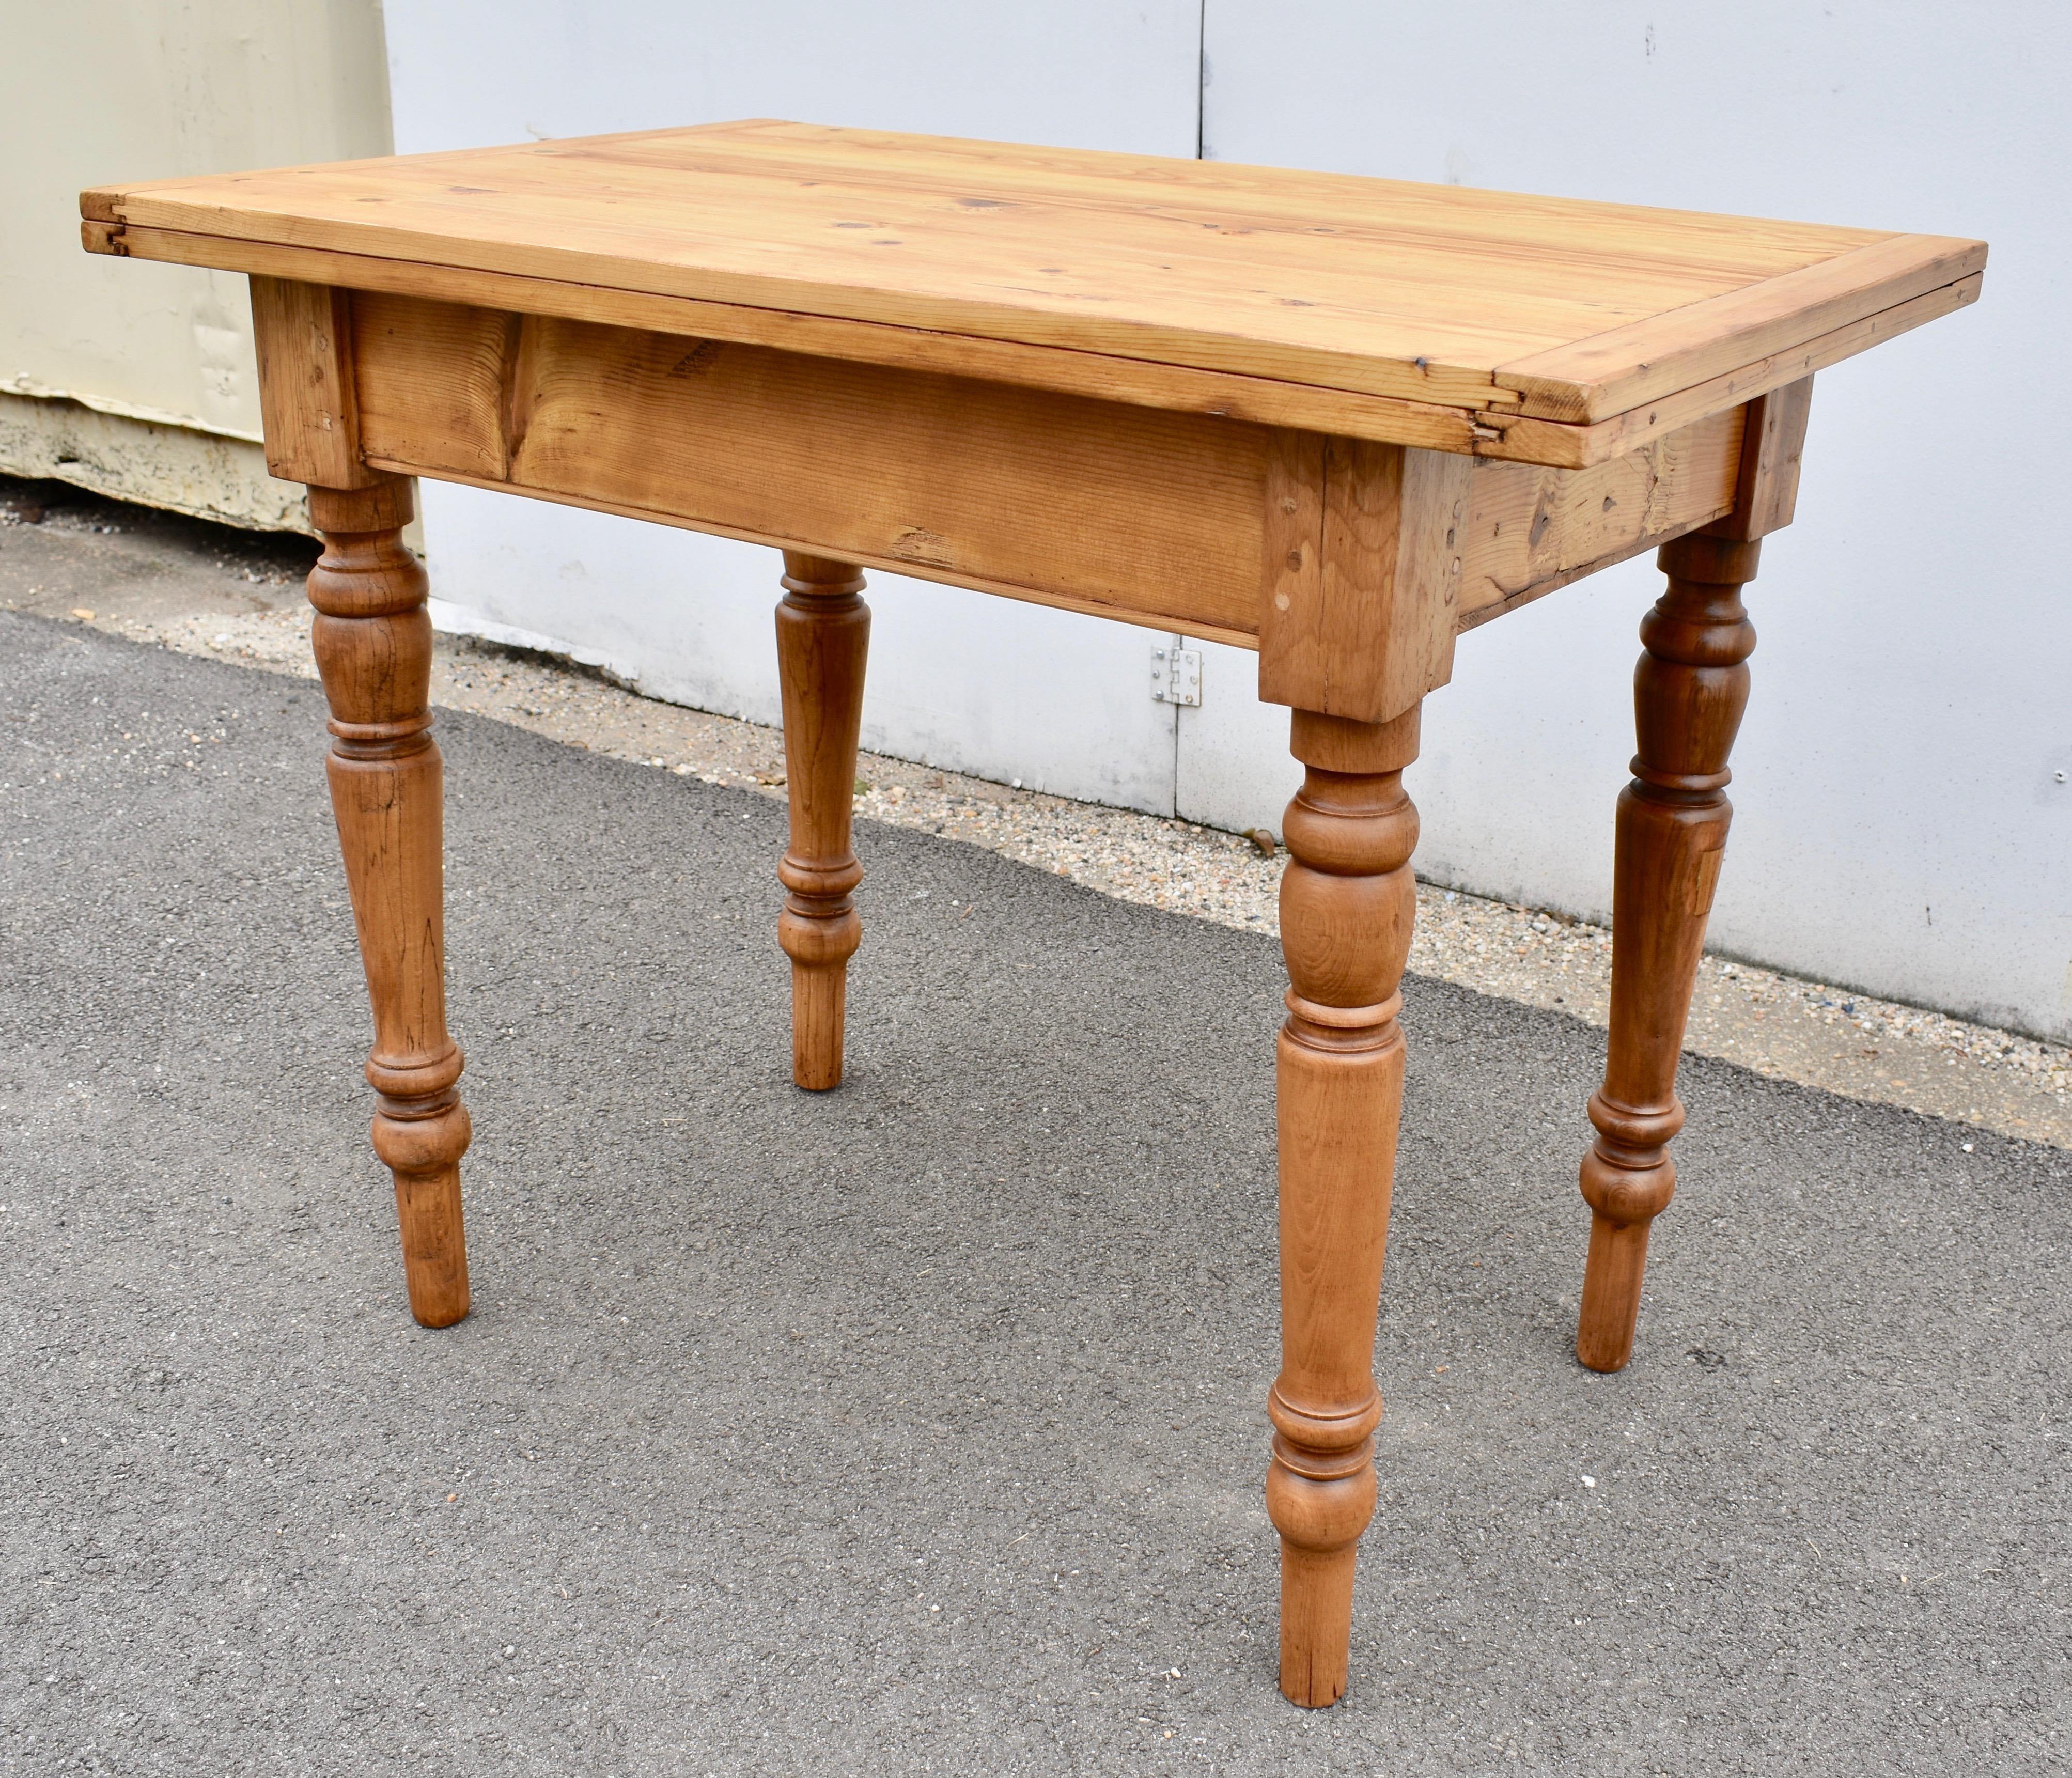 Polished Pine Turned Leg Swivel-Top Table For Sale